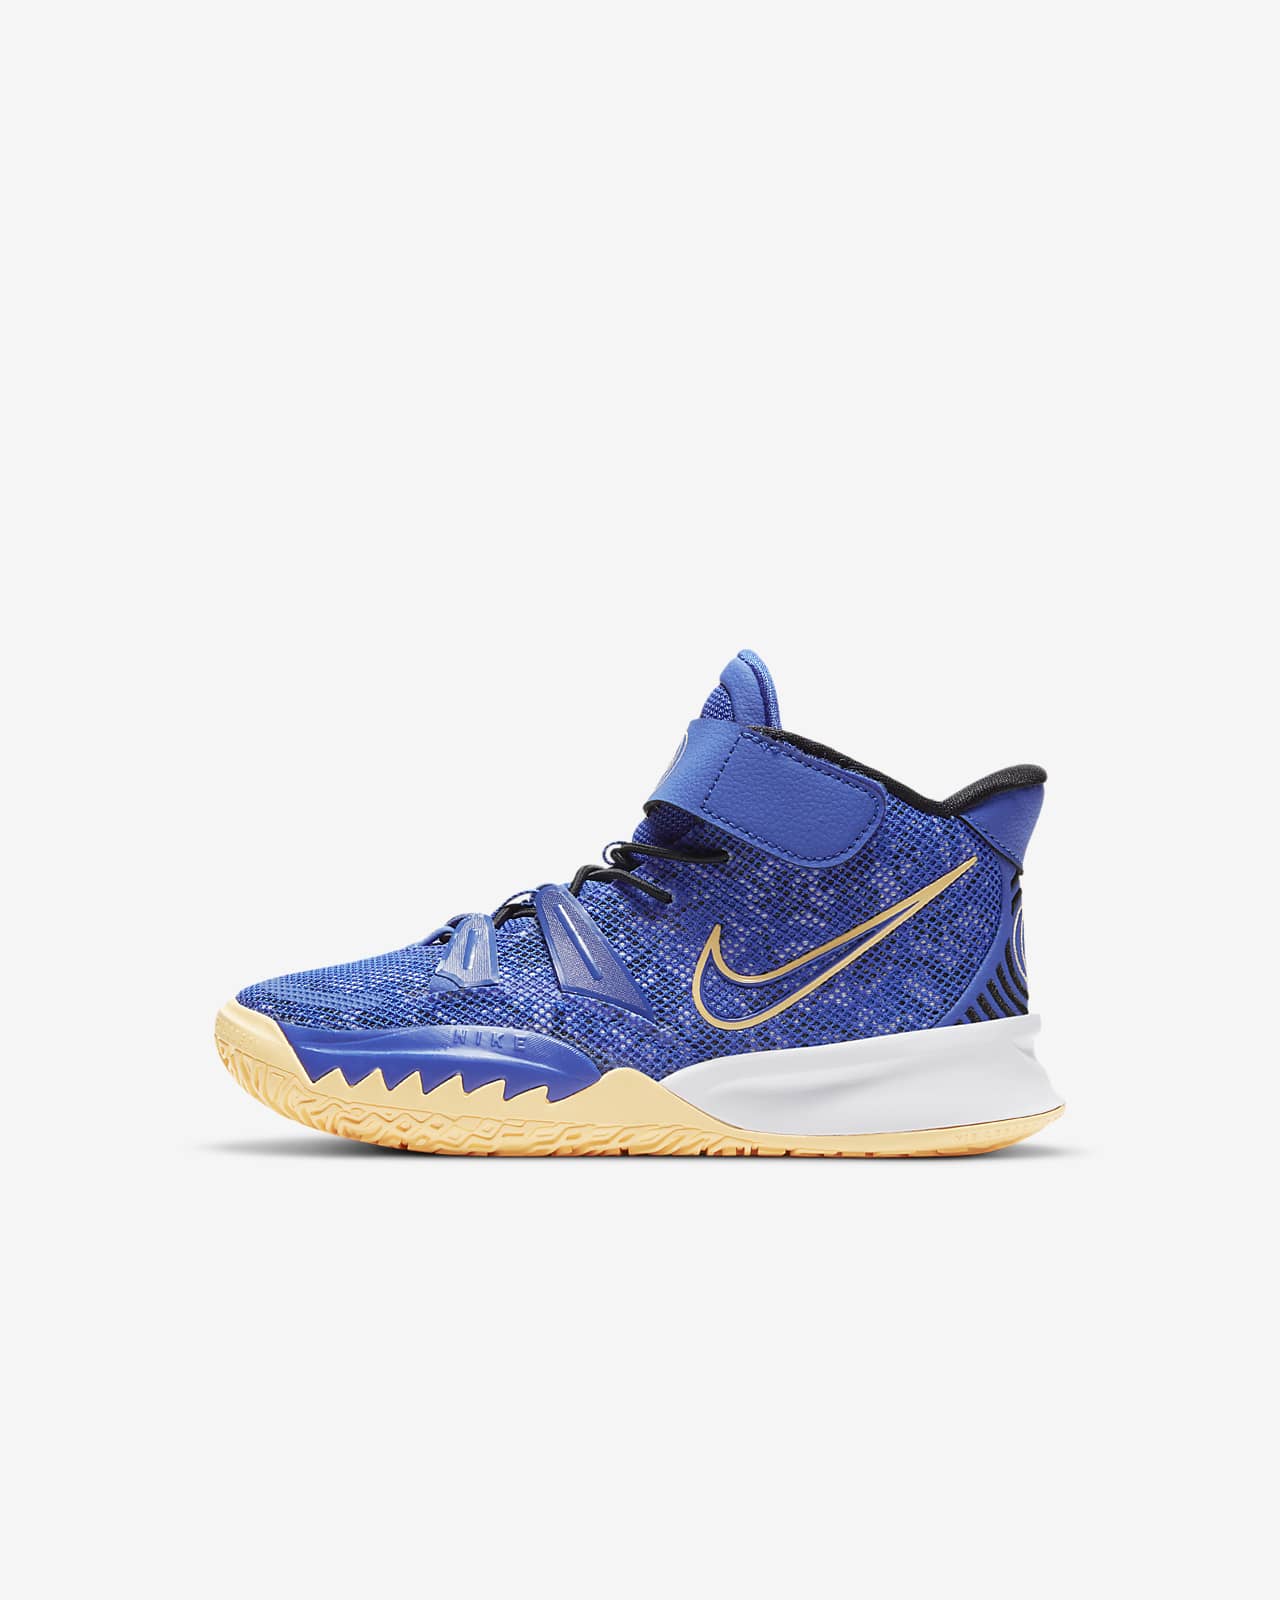 Kyrie 7 Younger Kids' Shoe. Nike ID